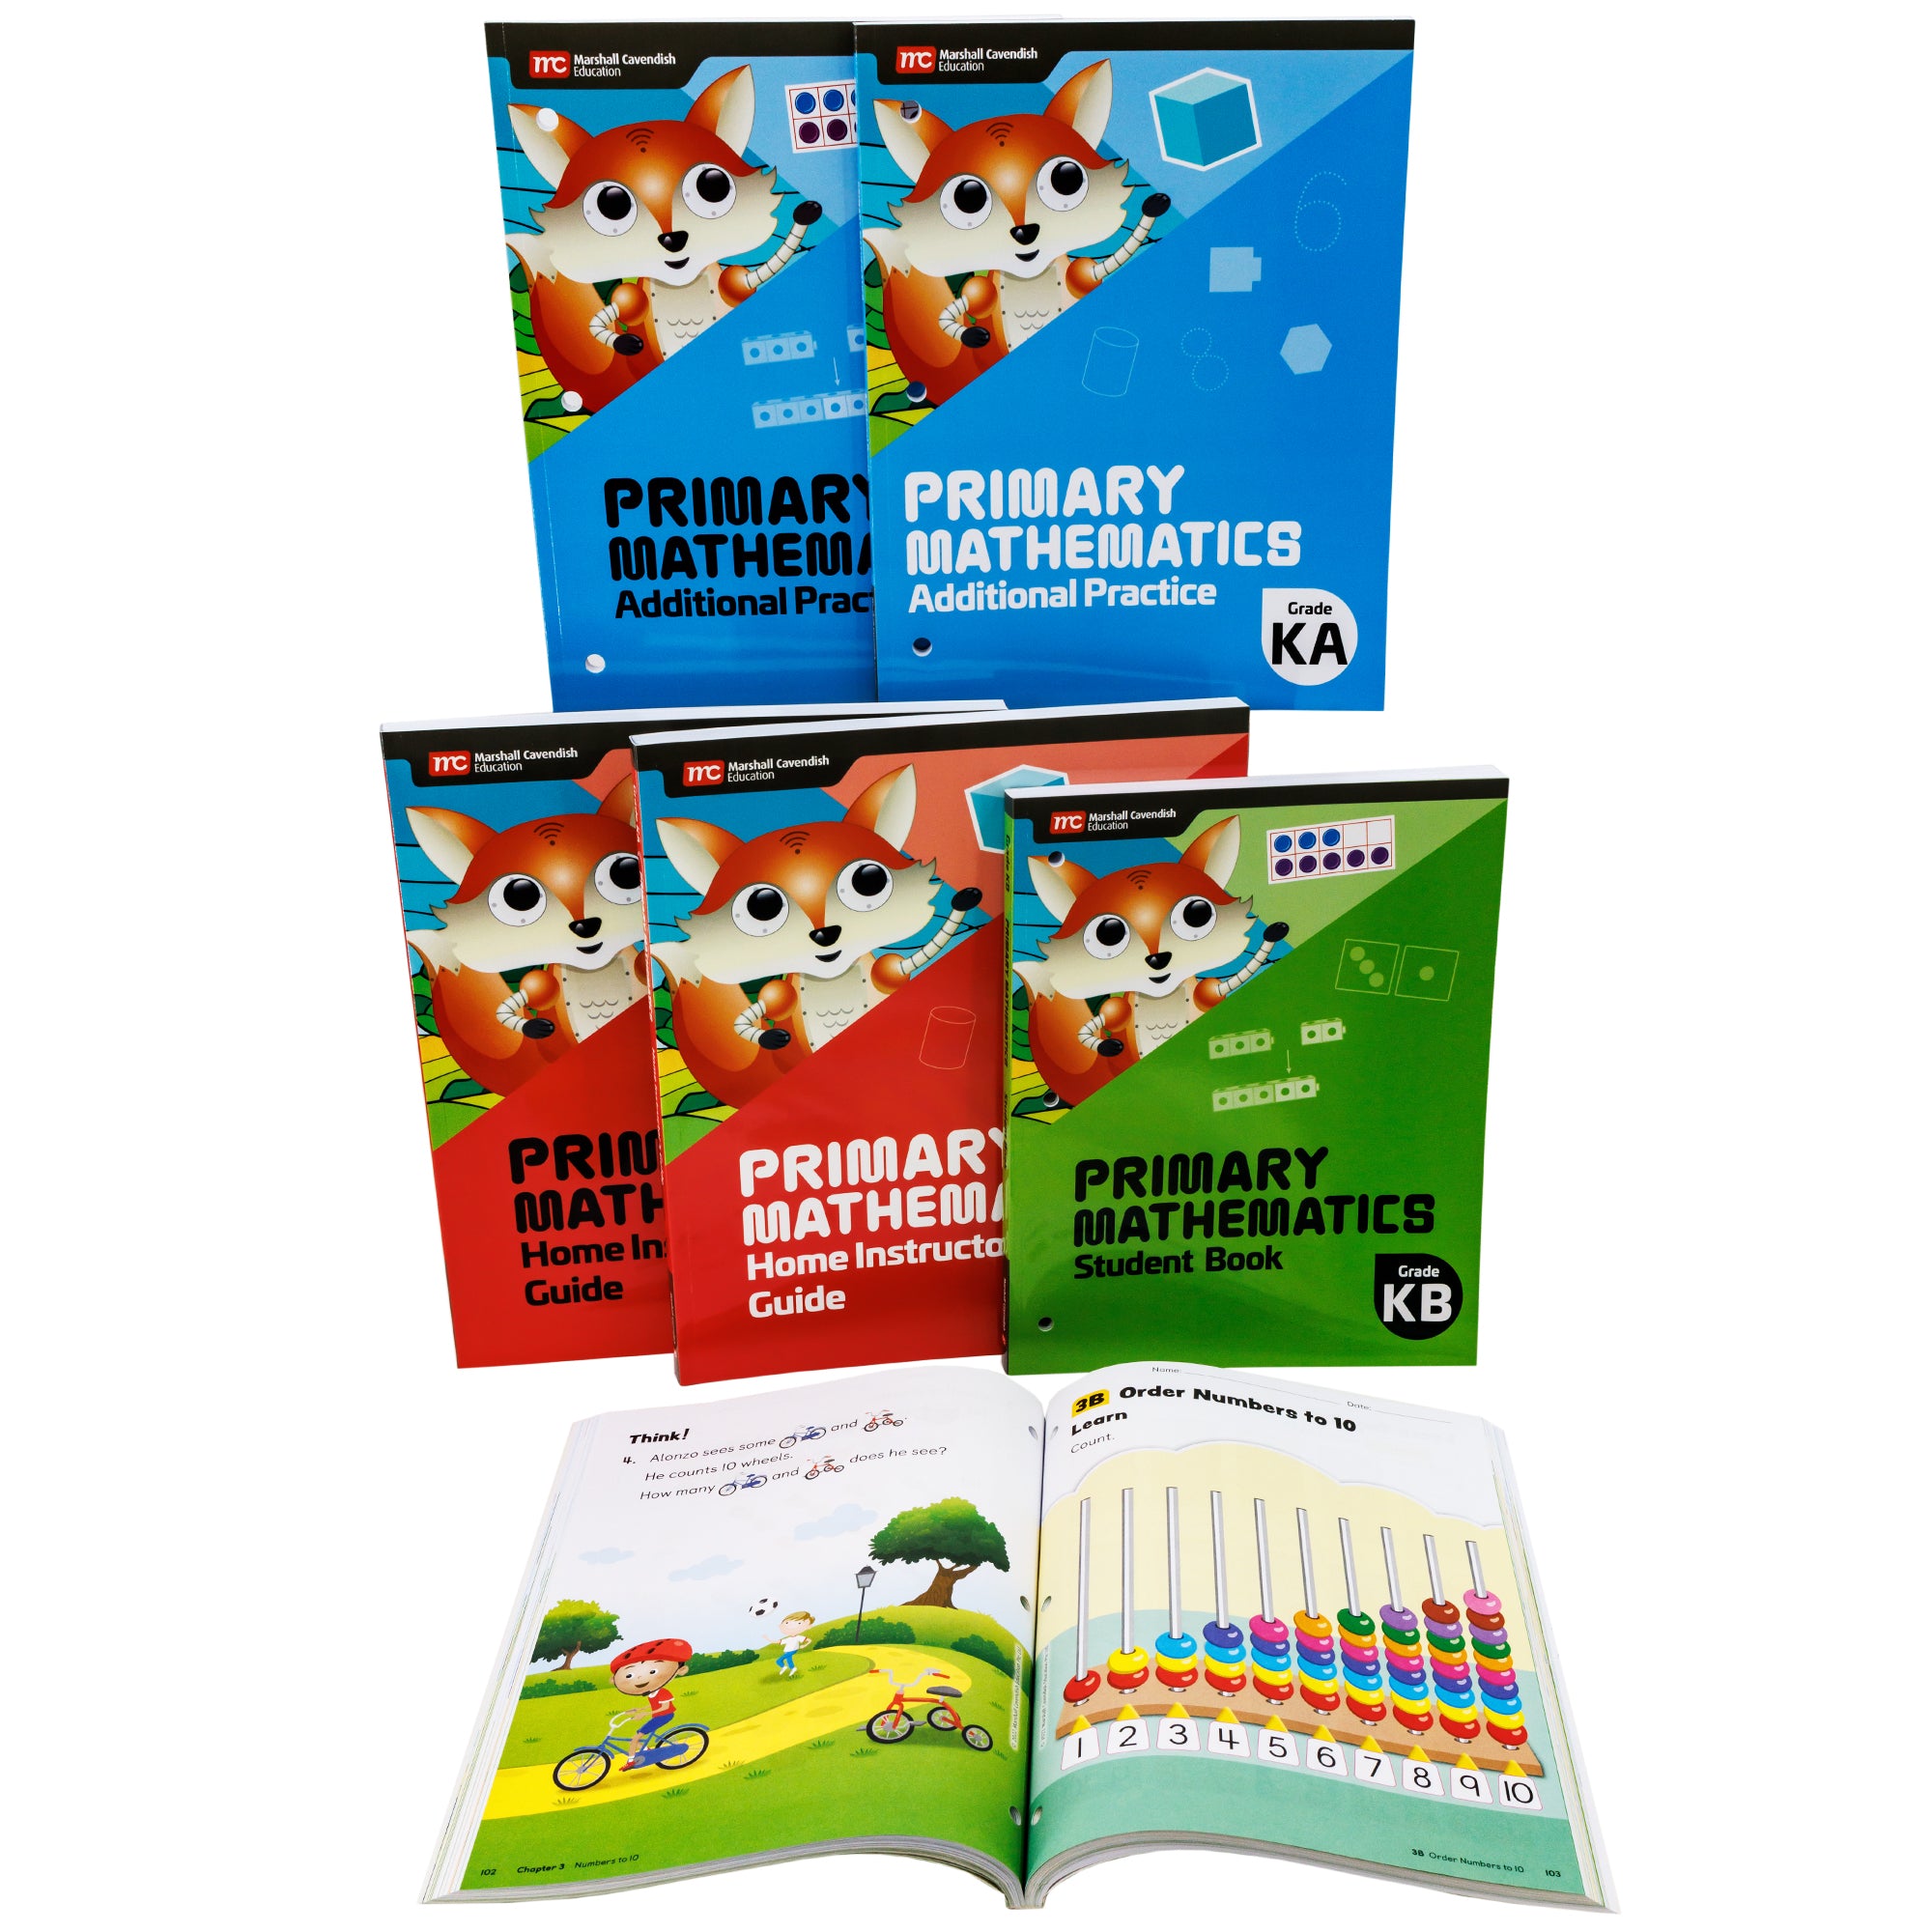 Singapore Primary Mathematics Kindergarten Set. Set of 6 books with a fox on each cover. On the top are 2 blue books. In the middle are 3 books, 2 red and 1 green. On the bottom is one open book showing a boy riding a bike on the left page, and an abacus with colored beads on the right page. 